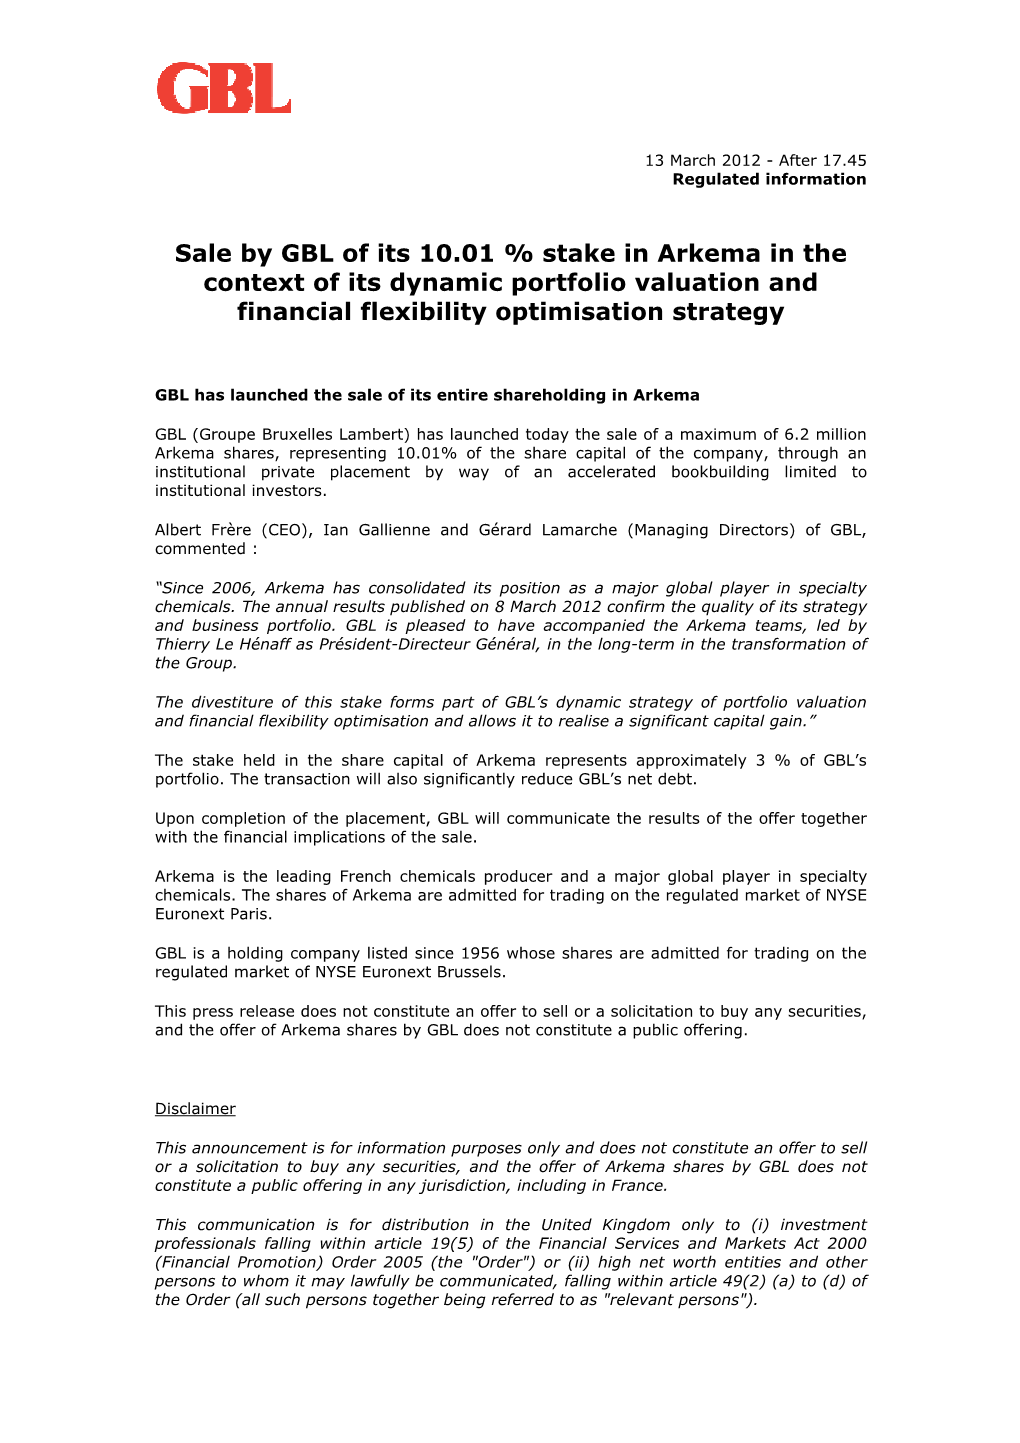 Sale by GBL of Its 10.01 % Stake in Arkema in the Context of Its Dynamic Portfolio Valuation and Financial Flexibility Optimisation Strategy